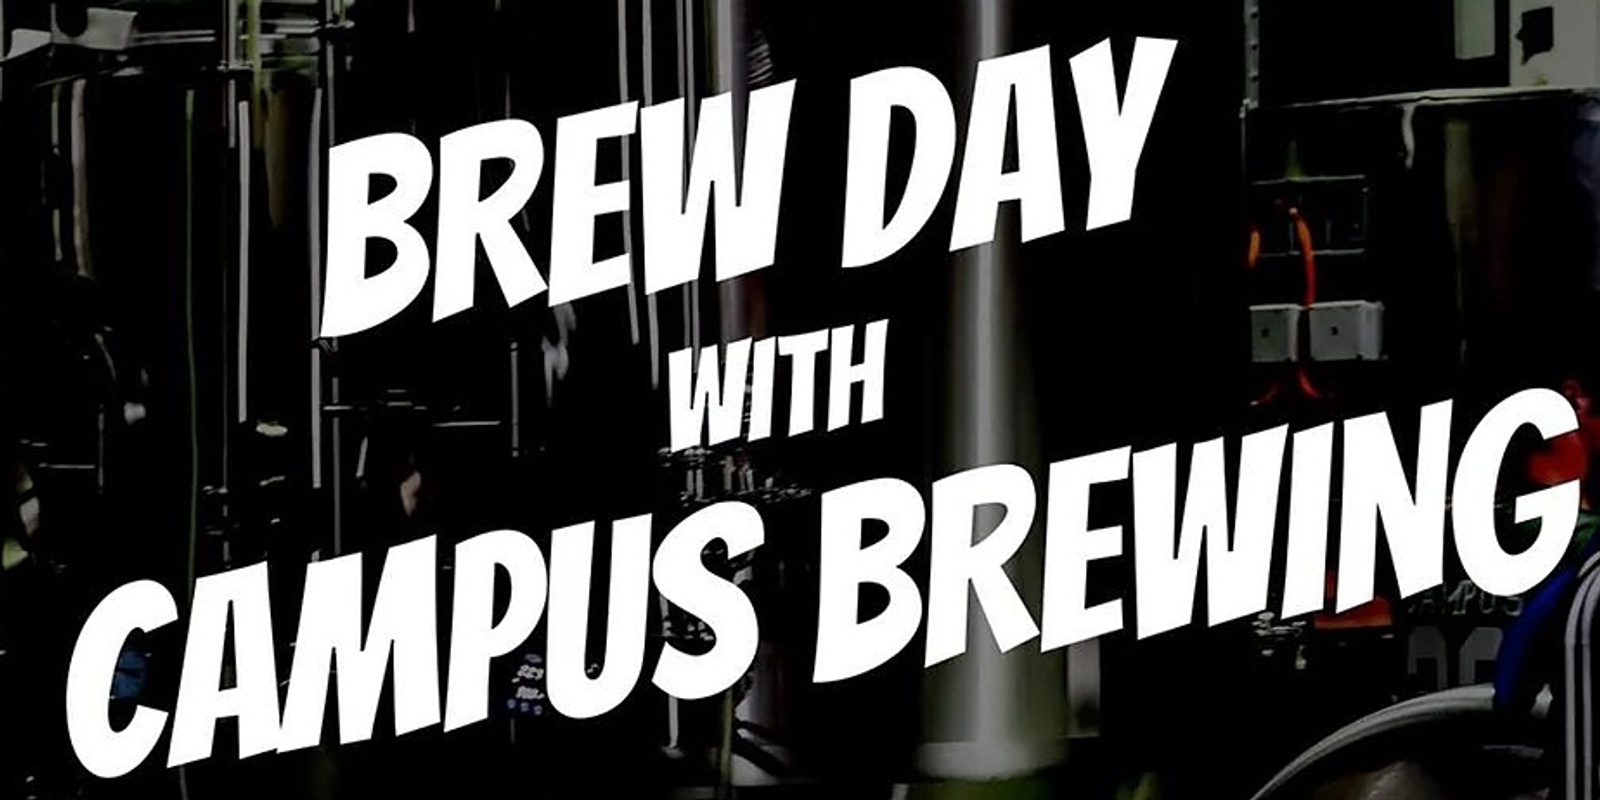 Banner image for Brew Day with Campus Brewing